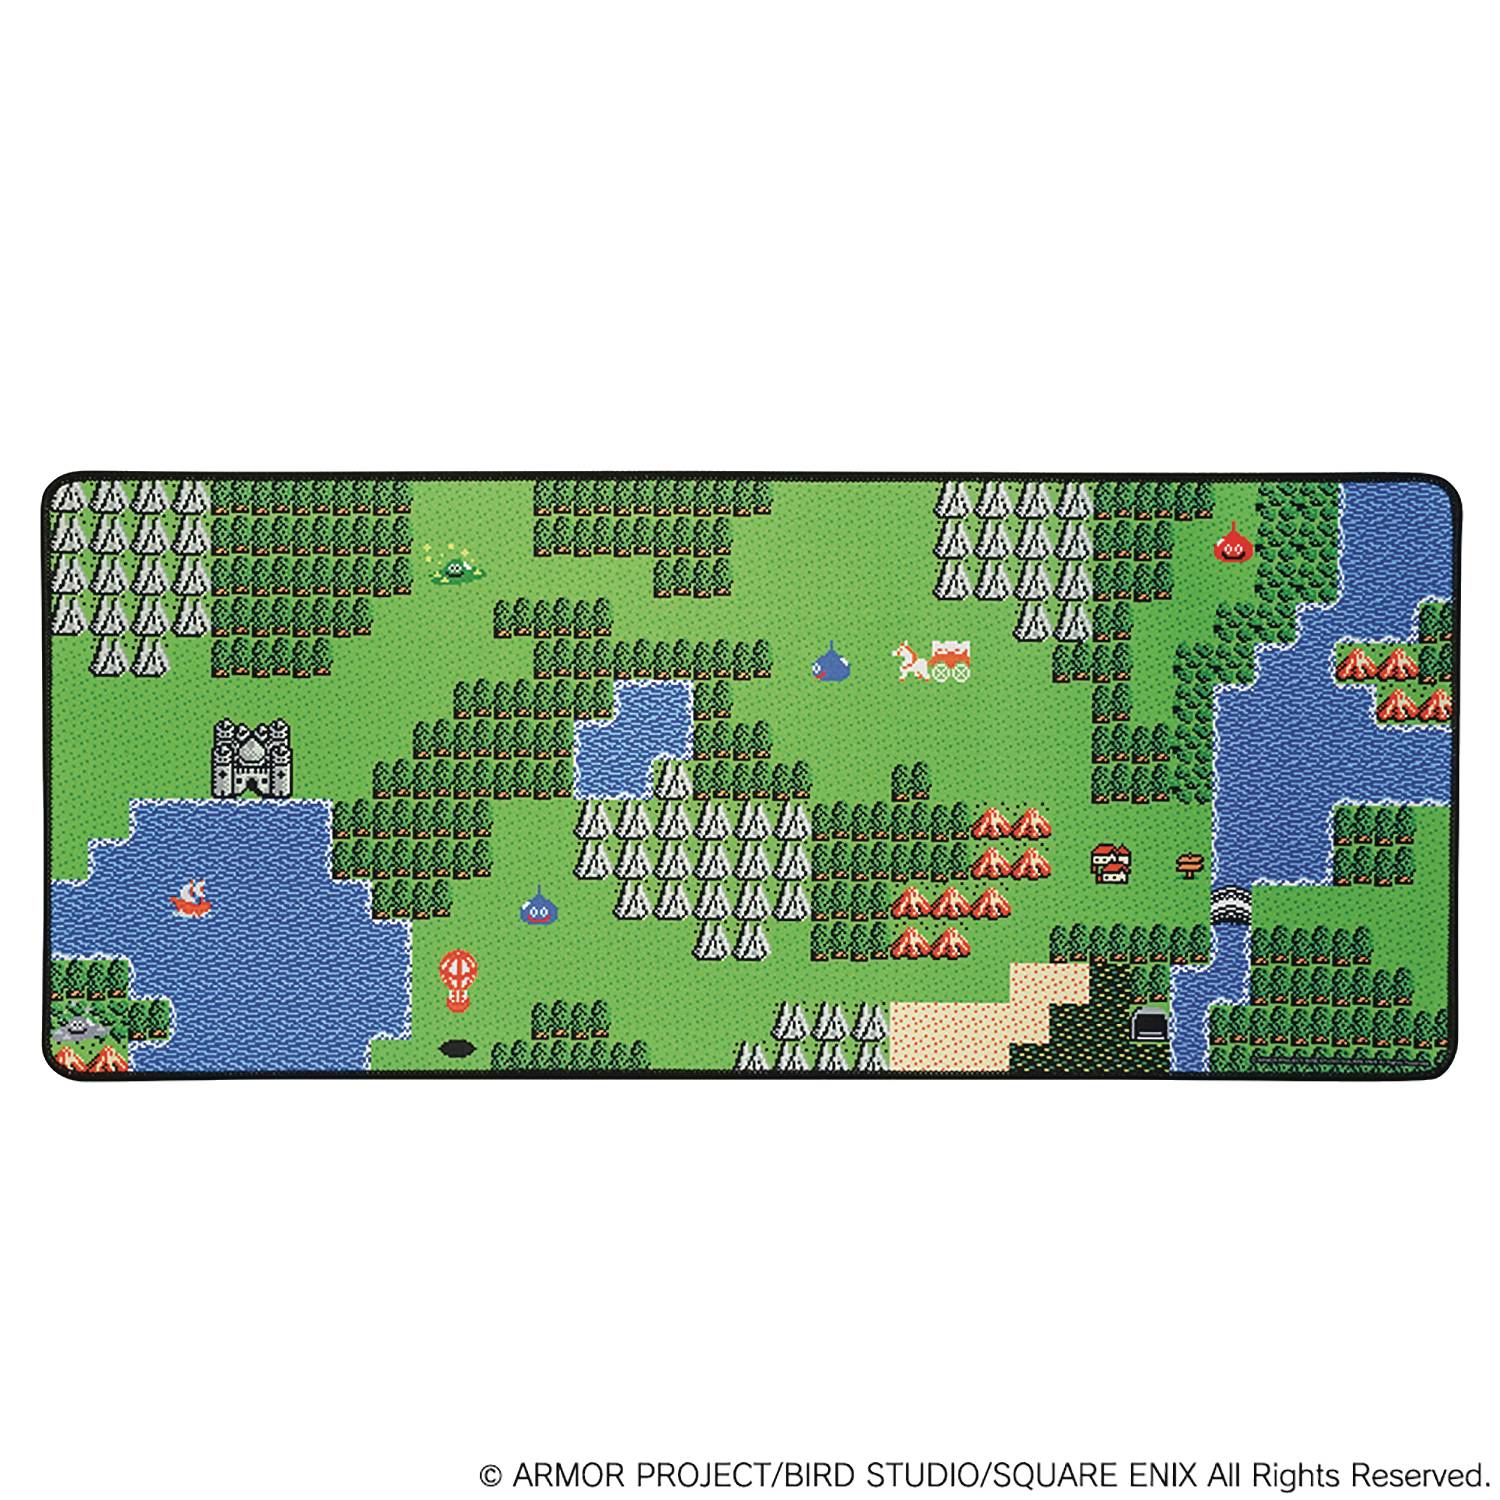 DRAGON QUEST PIXEL MAP GAMING MOUSE PAD